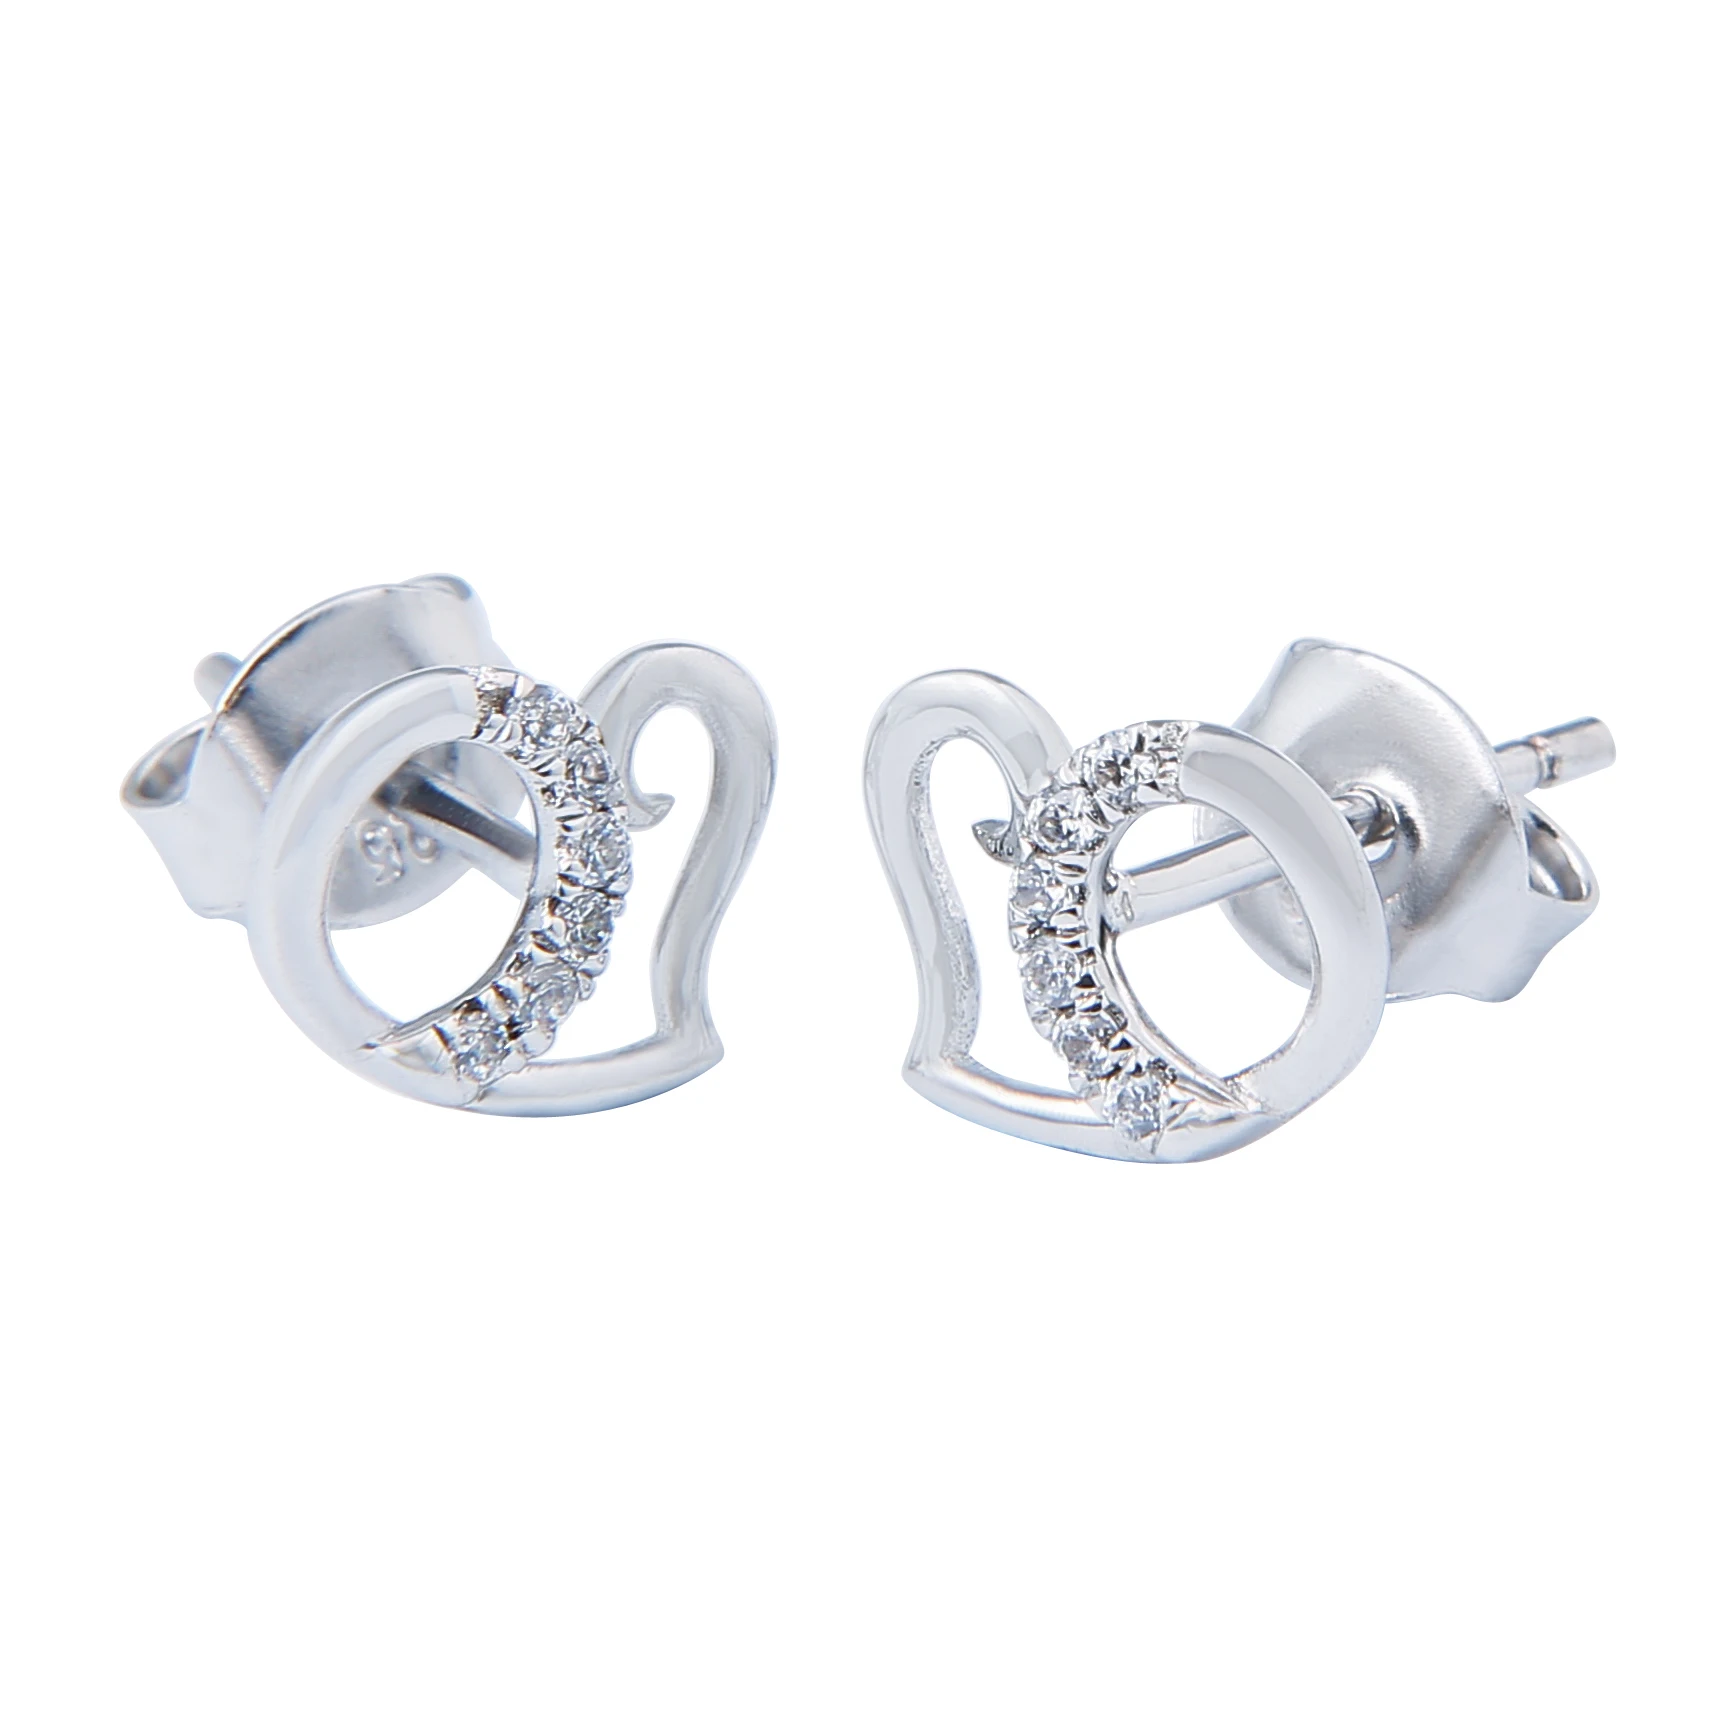 Joacii Latest Simple Designs Silver Earrings For Women With Joias Mulher